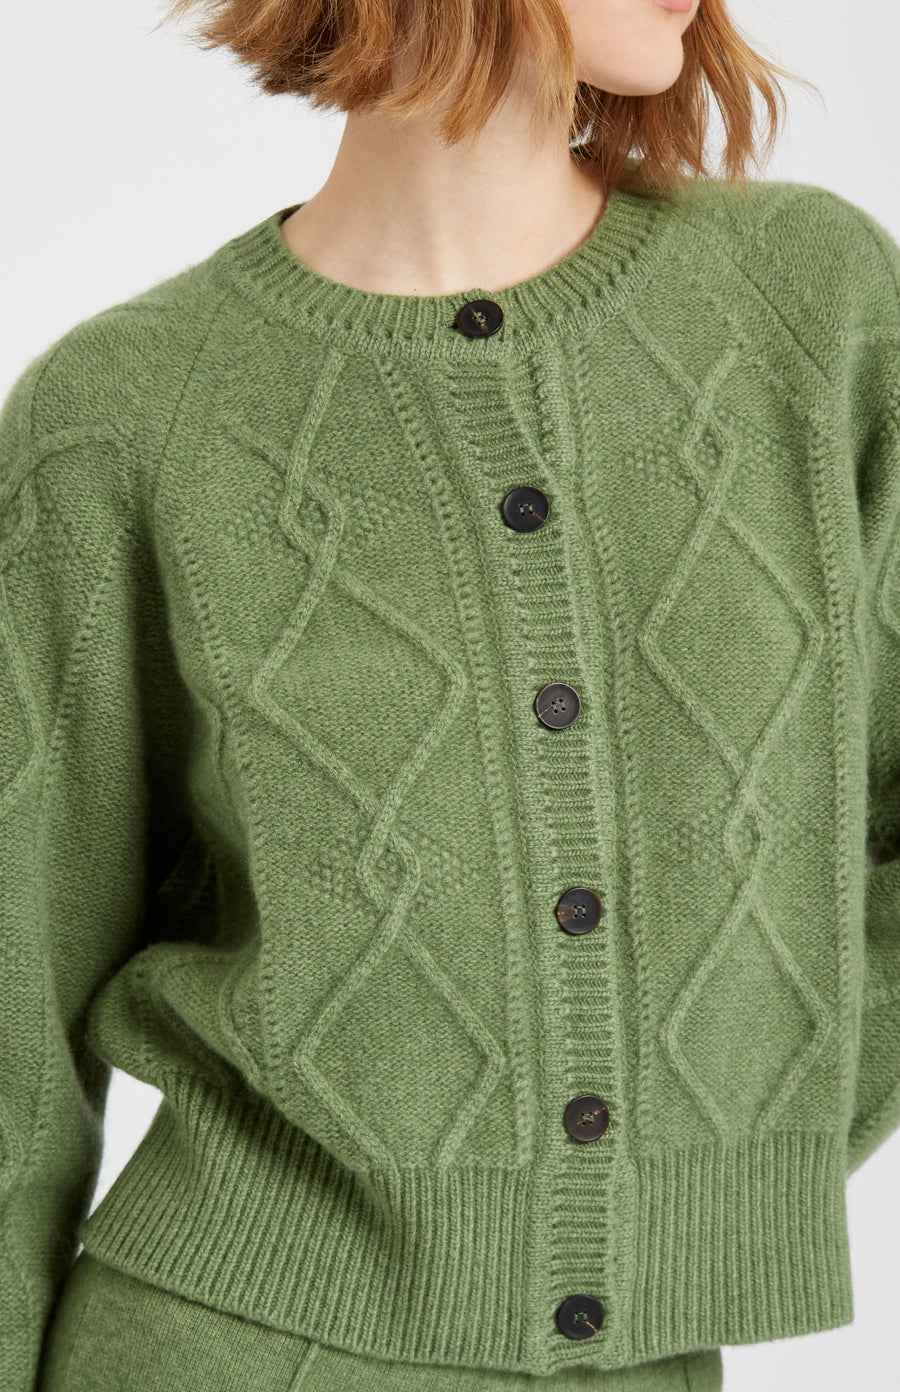 Pringle of Scotland Multi Texture Cashmere blend cardigan in Wood Sage showing button detail